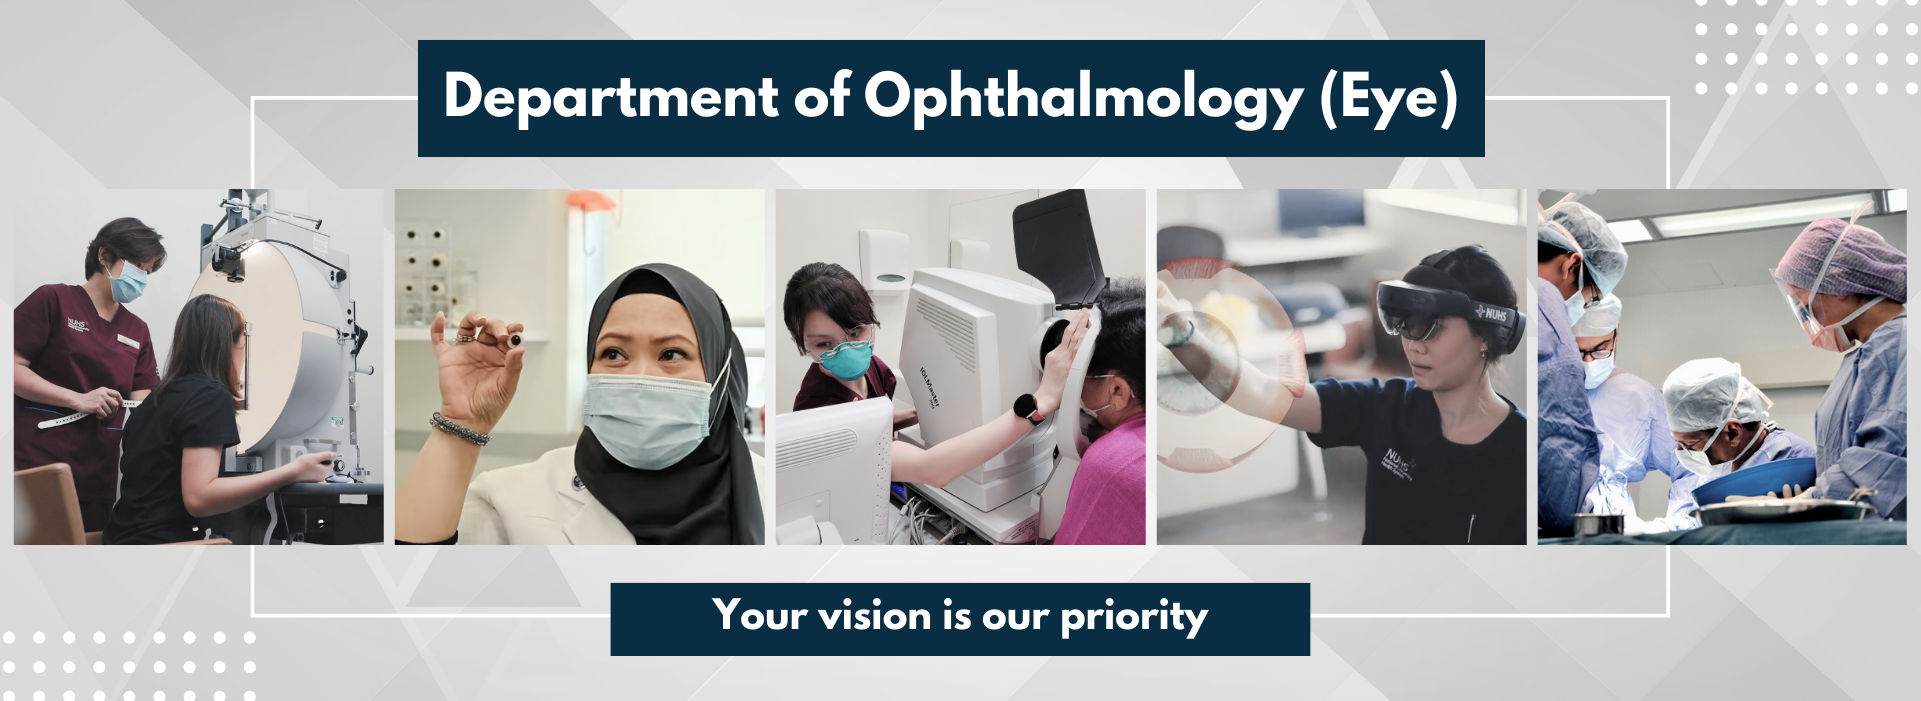 Department of Opthalmology